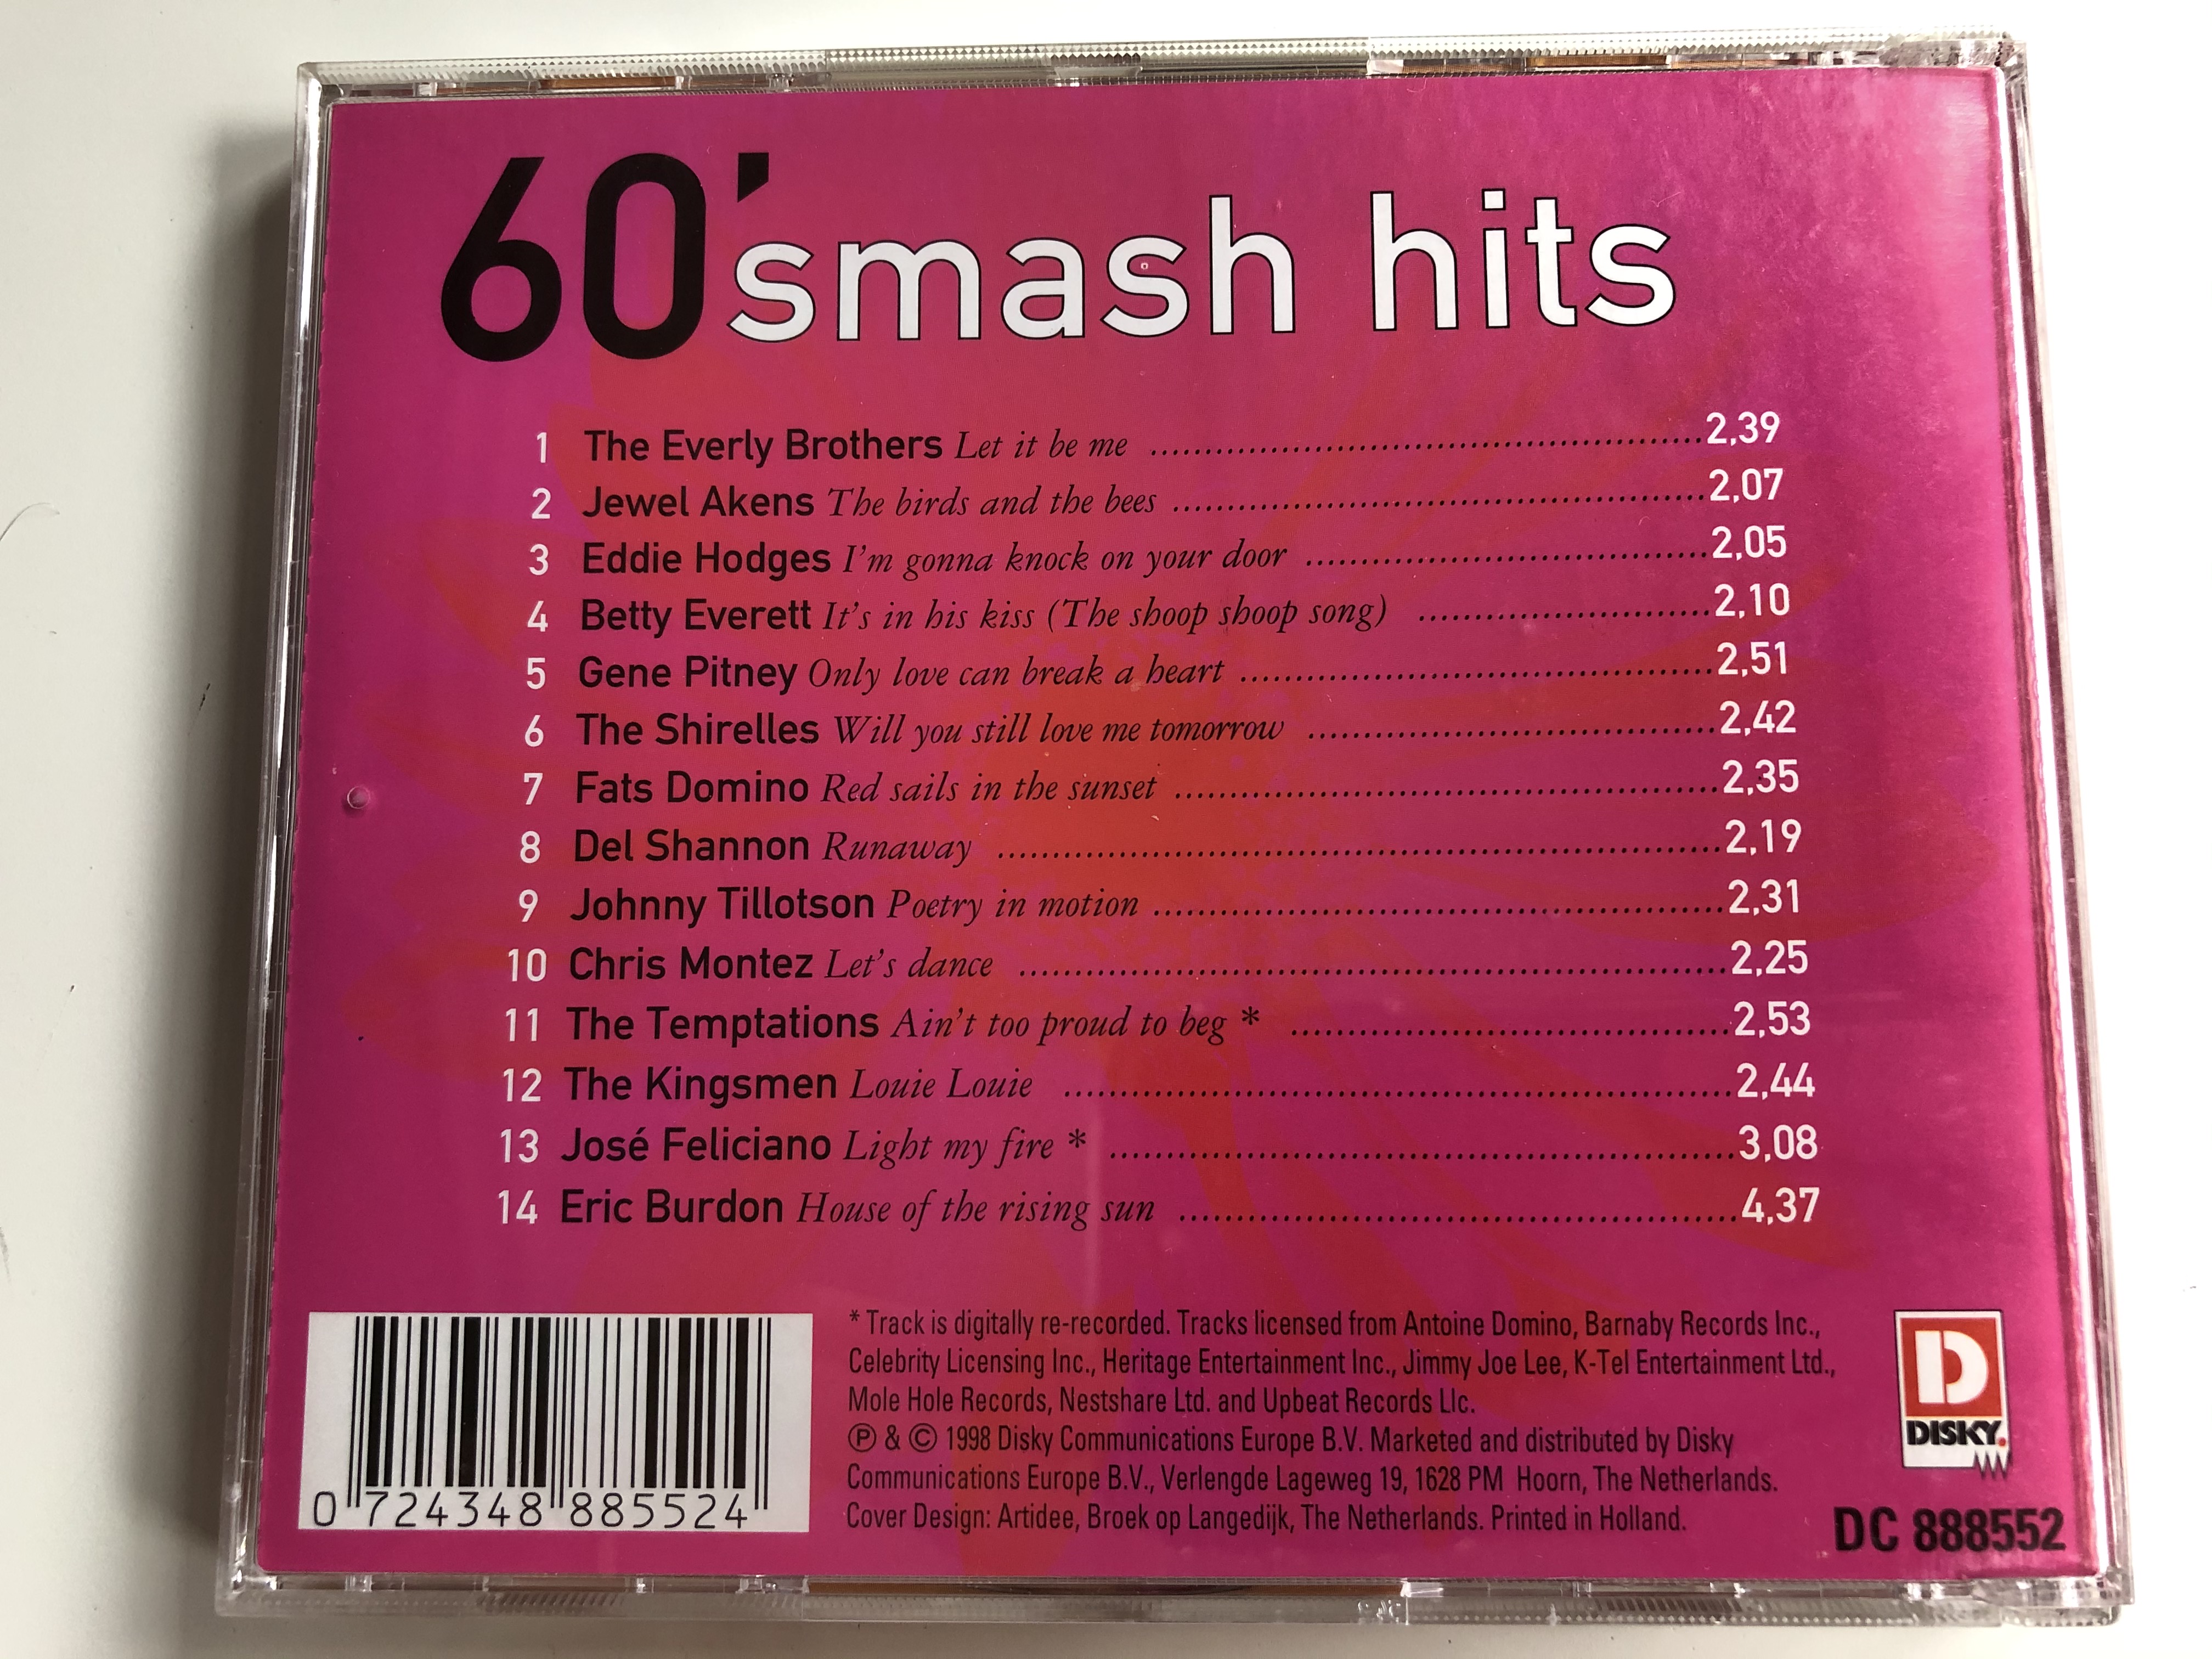 60-s-smash-hits-the-everly-brothers-the-shirelles-fats-domino-del-shannon-the-temptations-disky-audio-cd-1998-dc-888552-4-.jpg